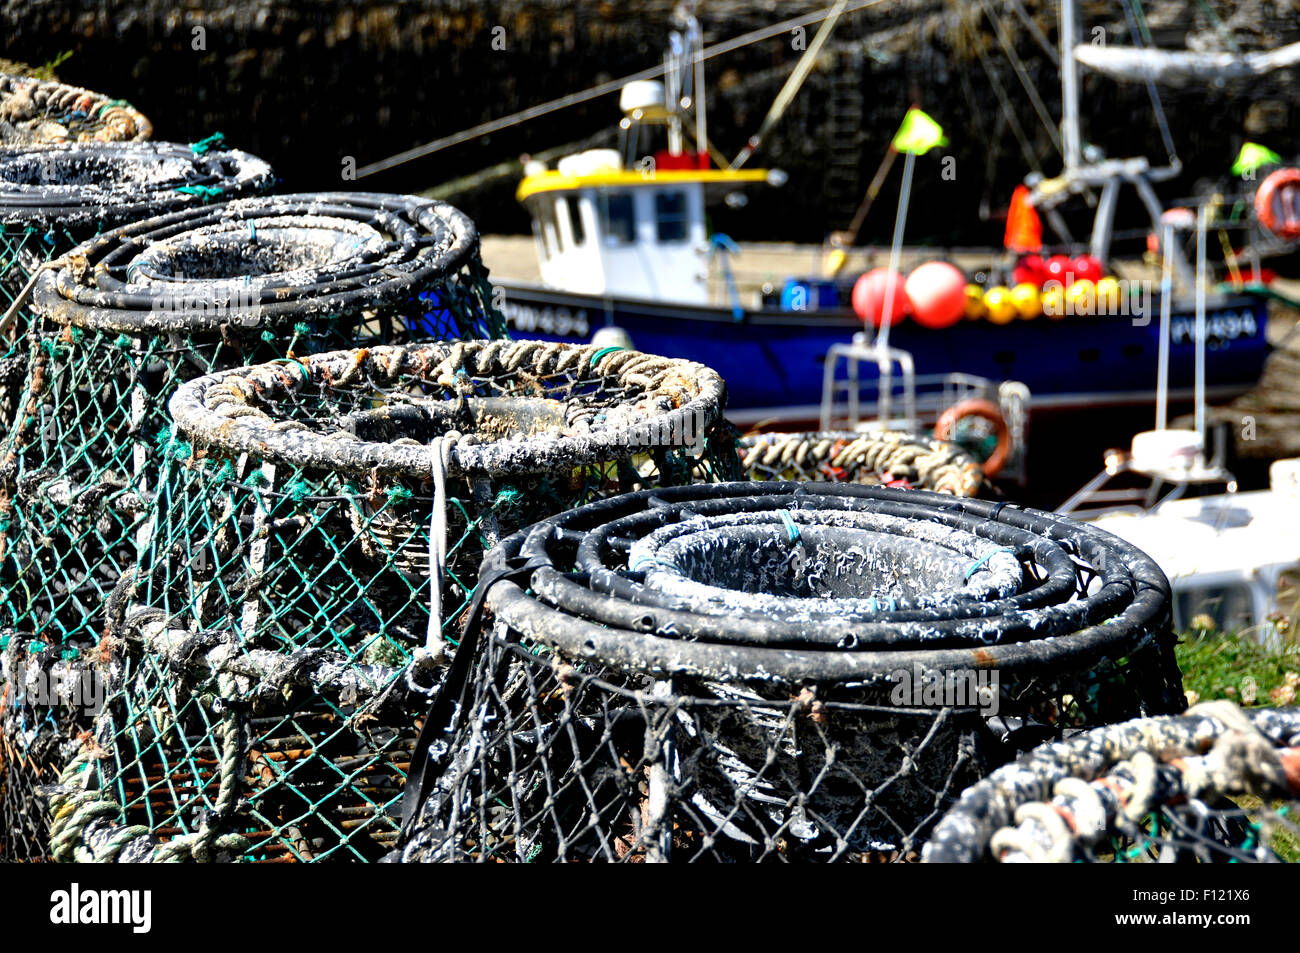 North Cornwall - Boscastle harbour - lobster pots on the quay - backdrop fishing boat - differential focus - bright sunlight Stock Photo